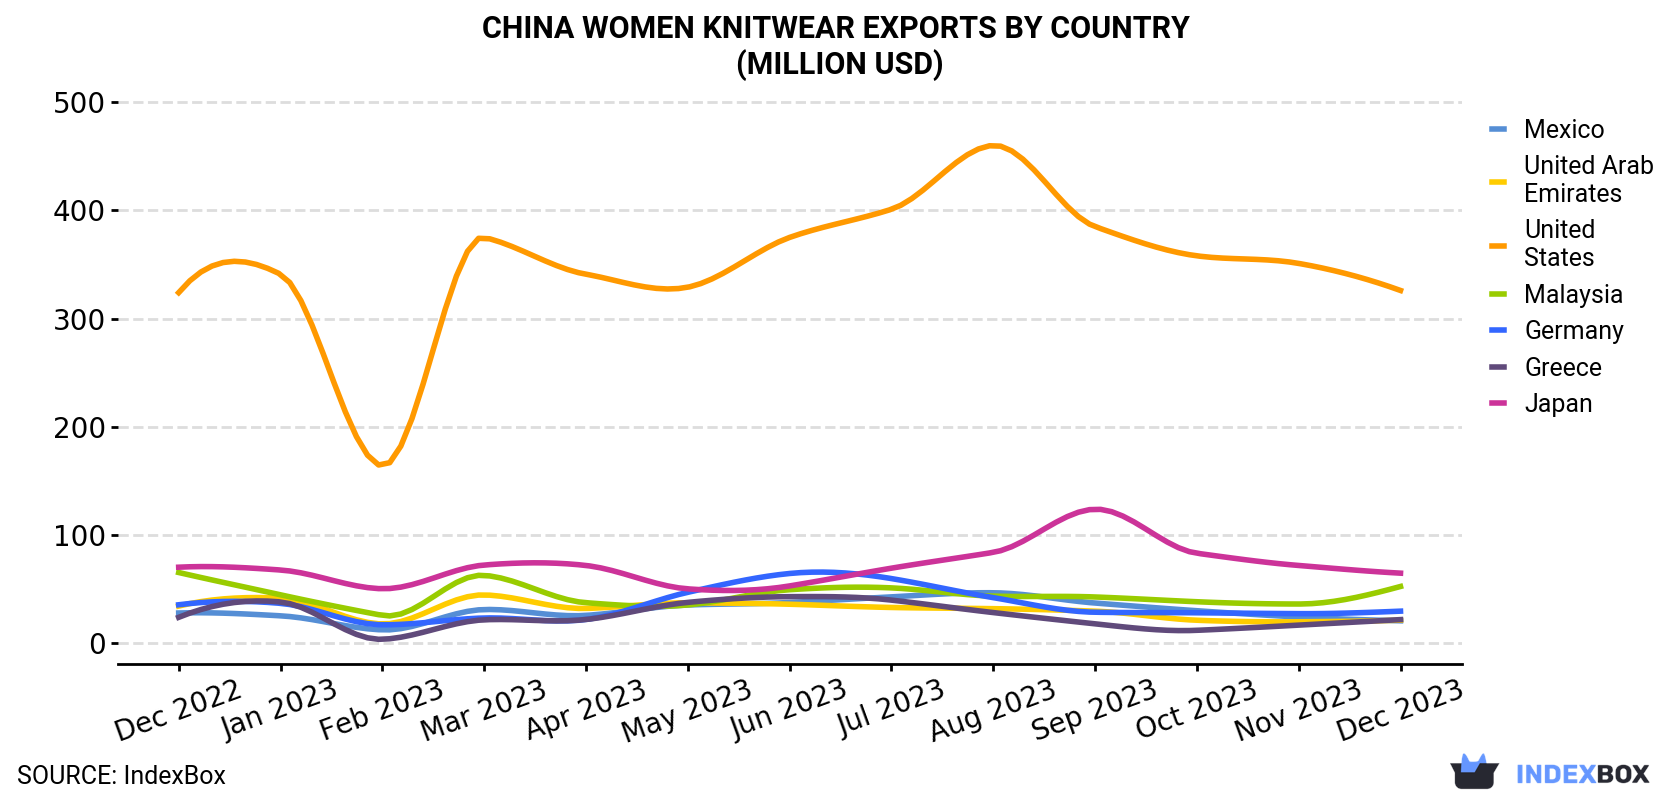 China Women Knitwear Exports By Country (Million USD)